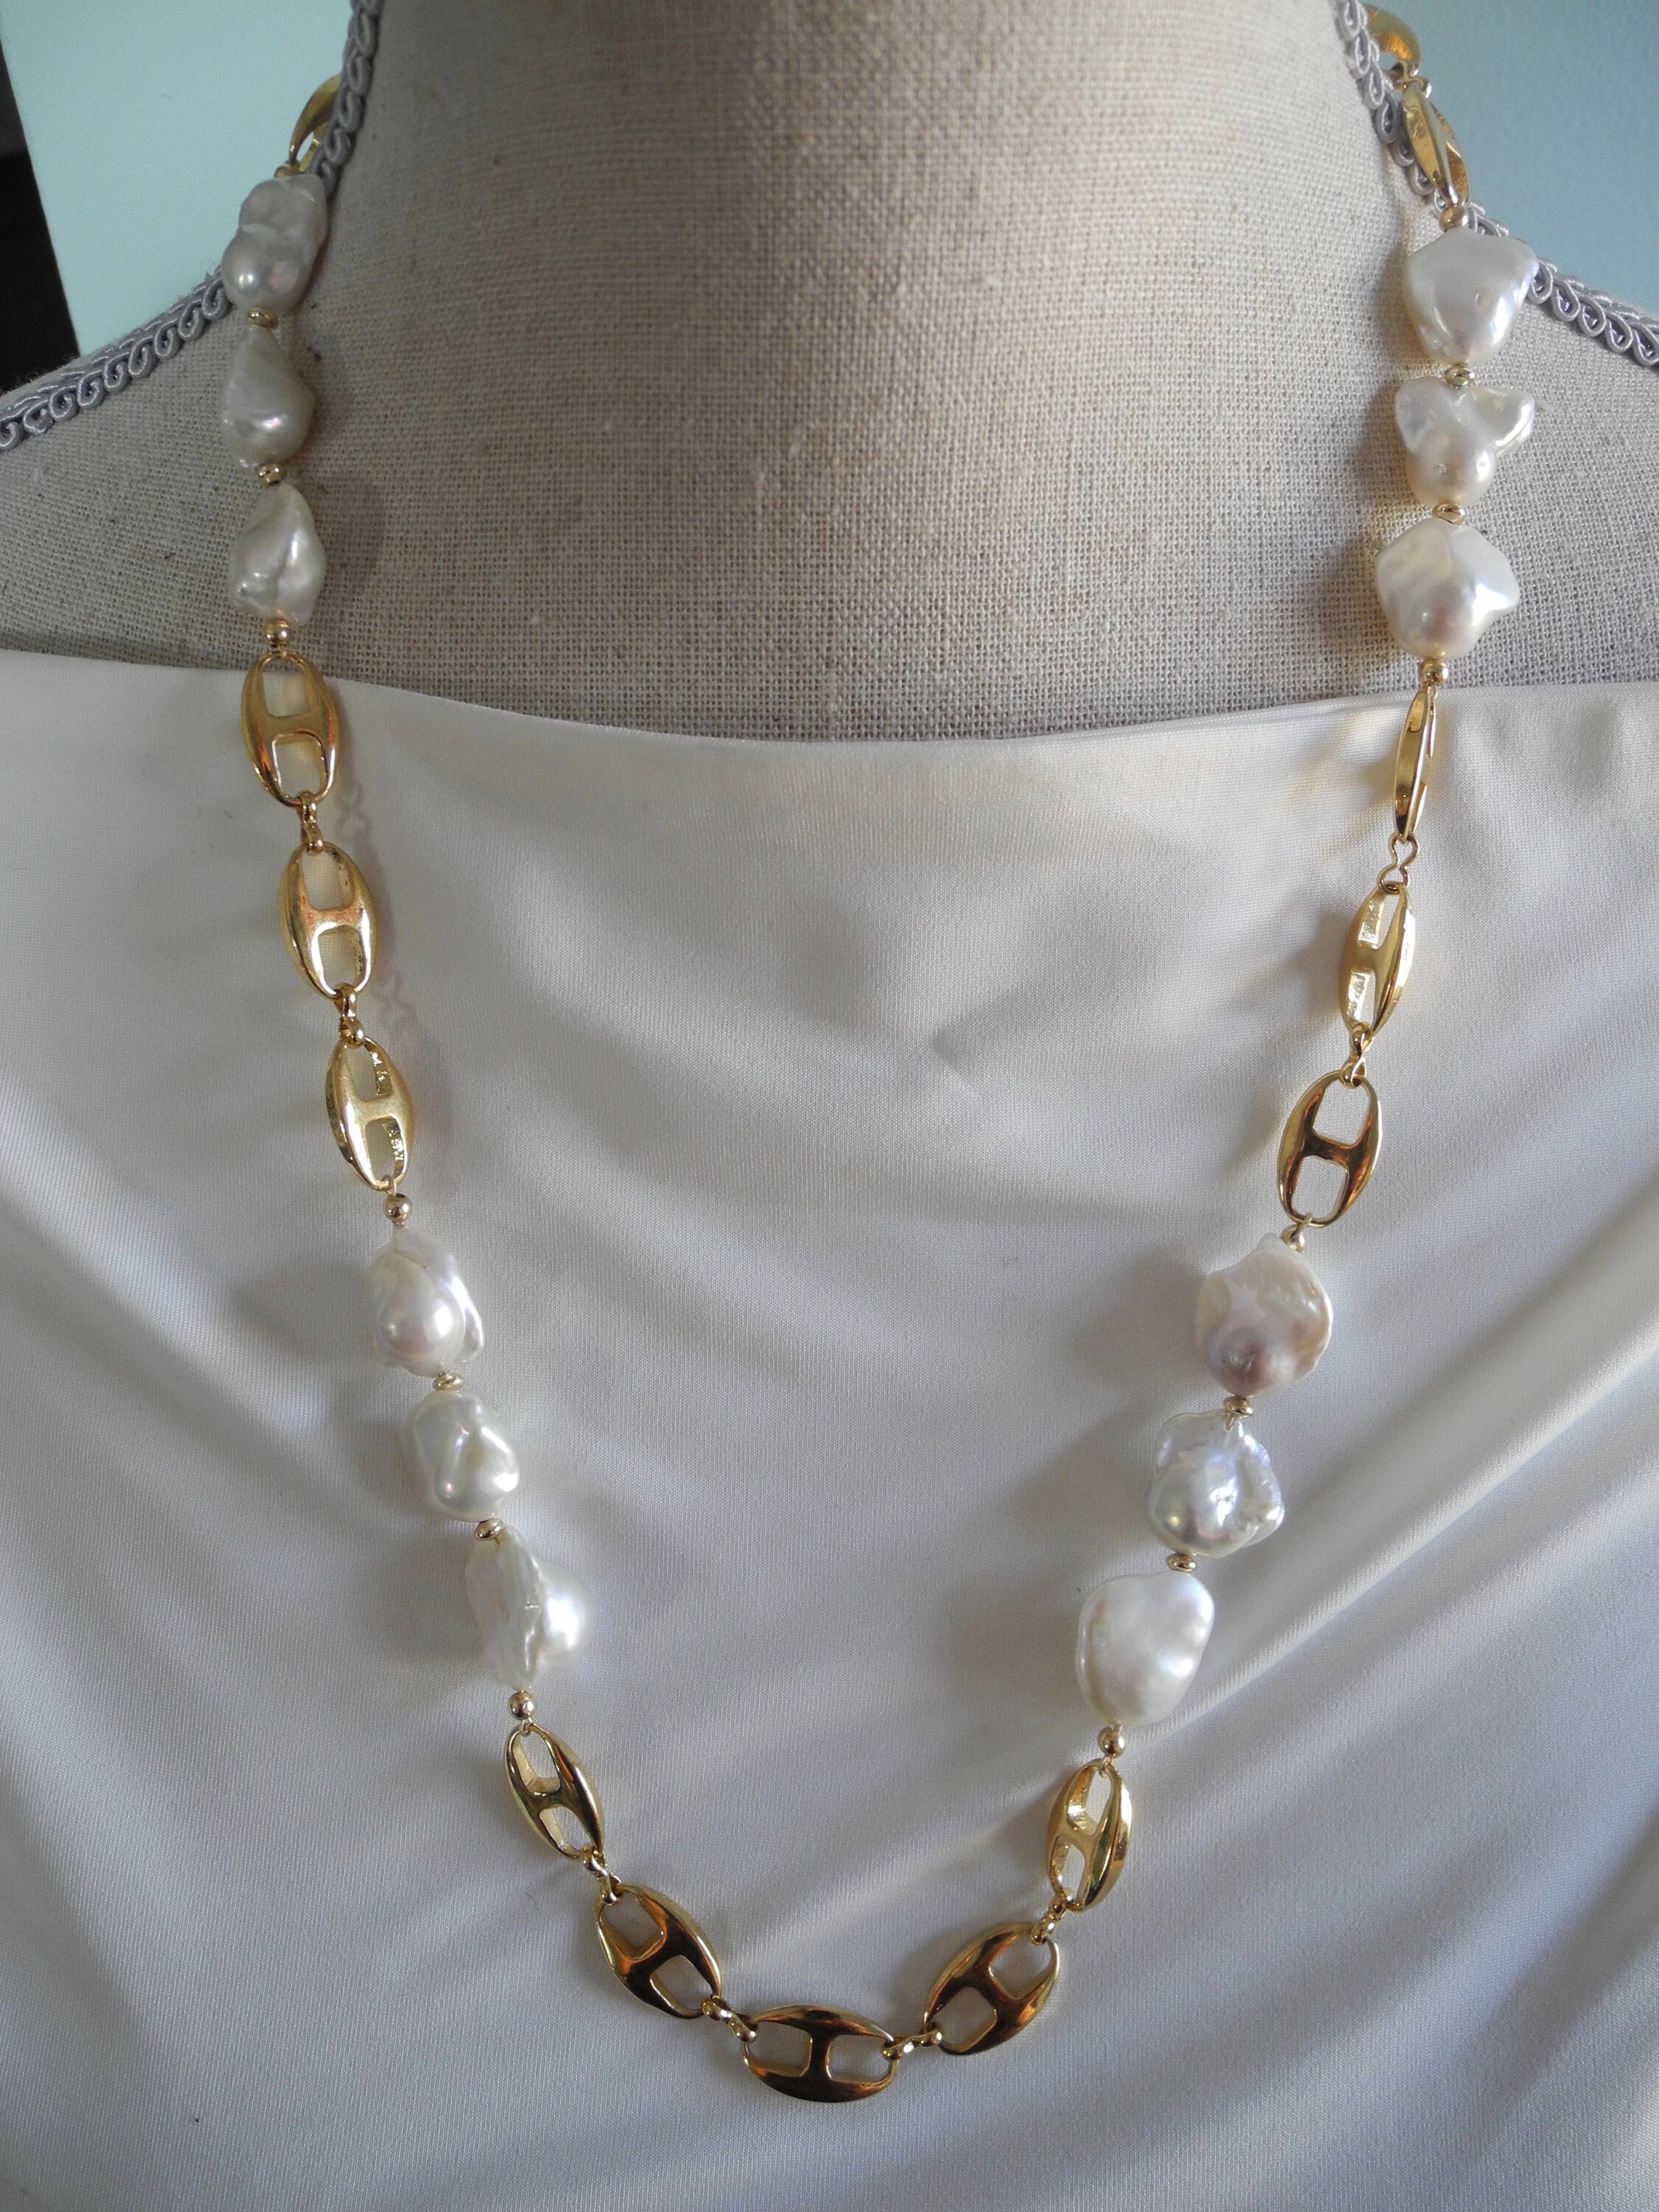 Baroque pearl necklace with gold anchor chain | Etsy